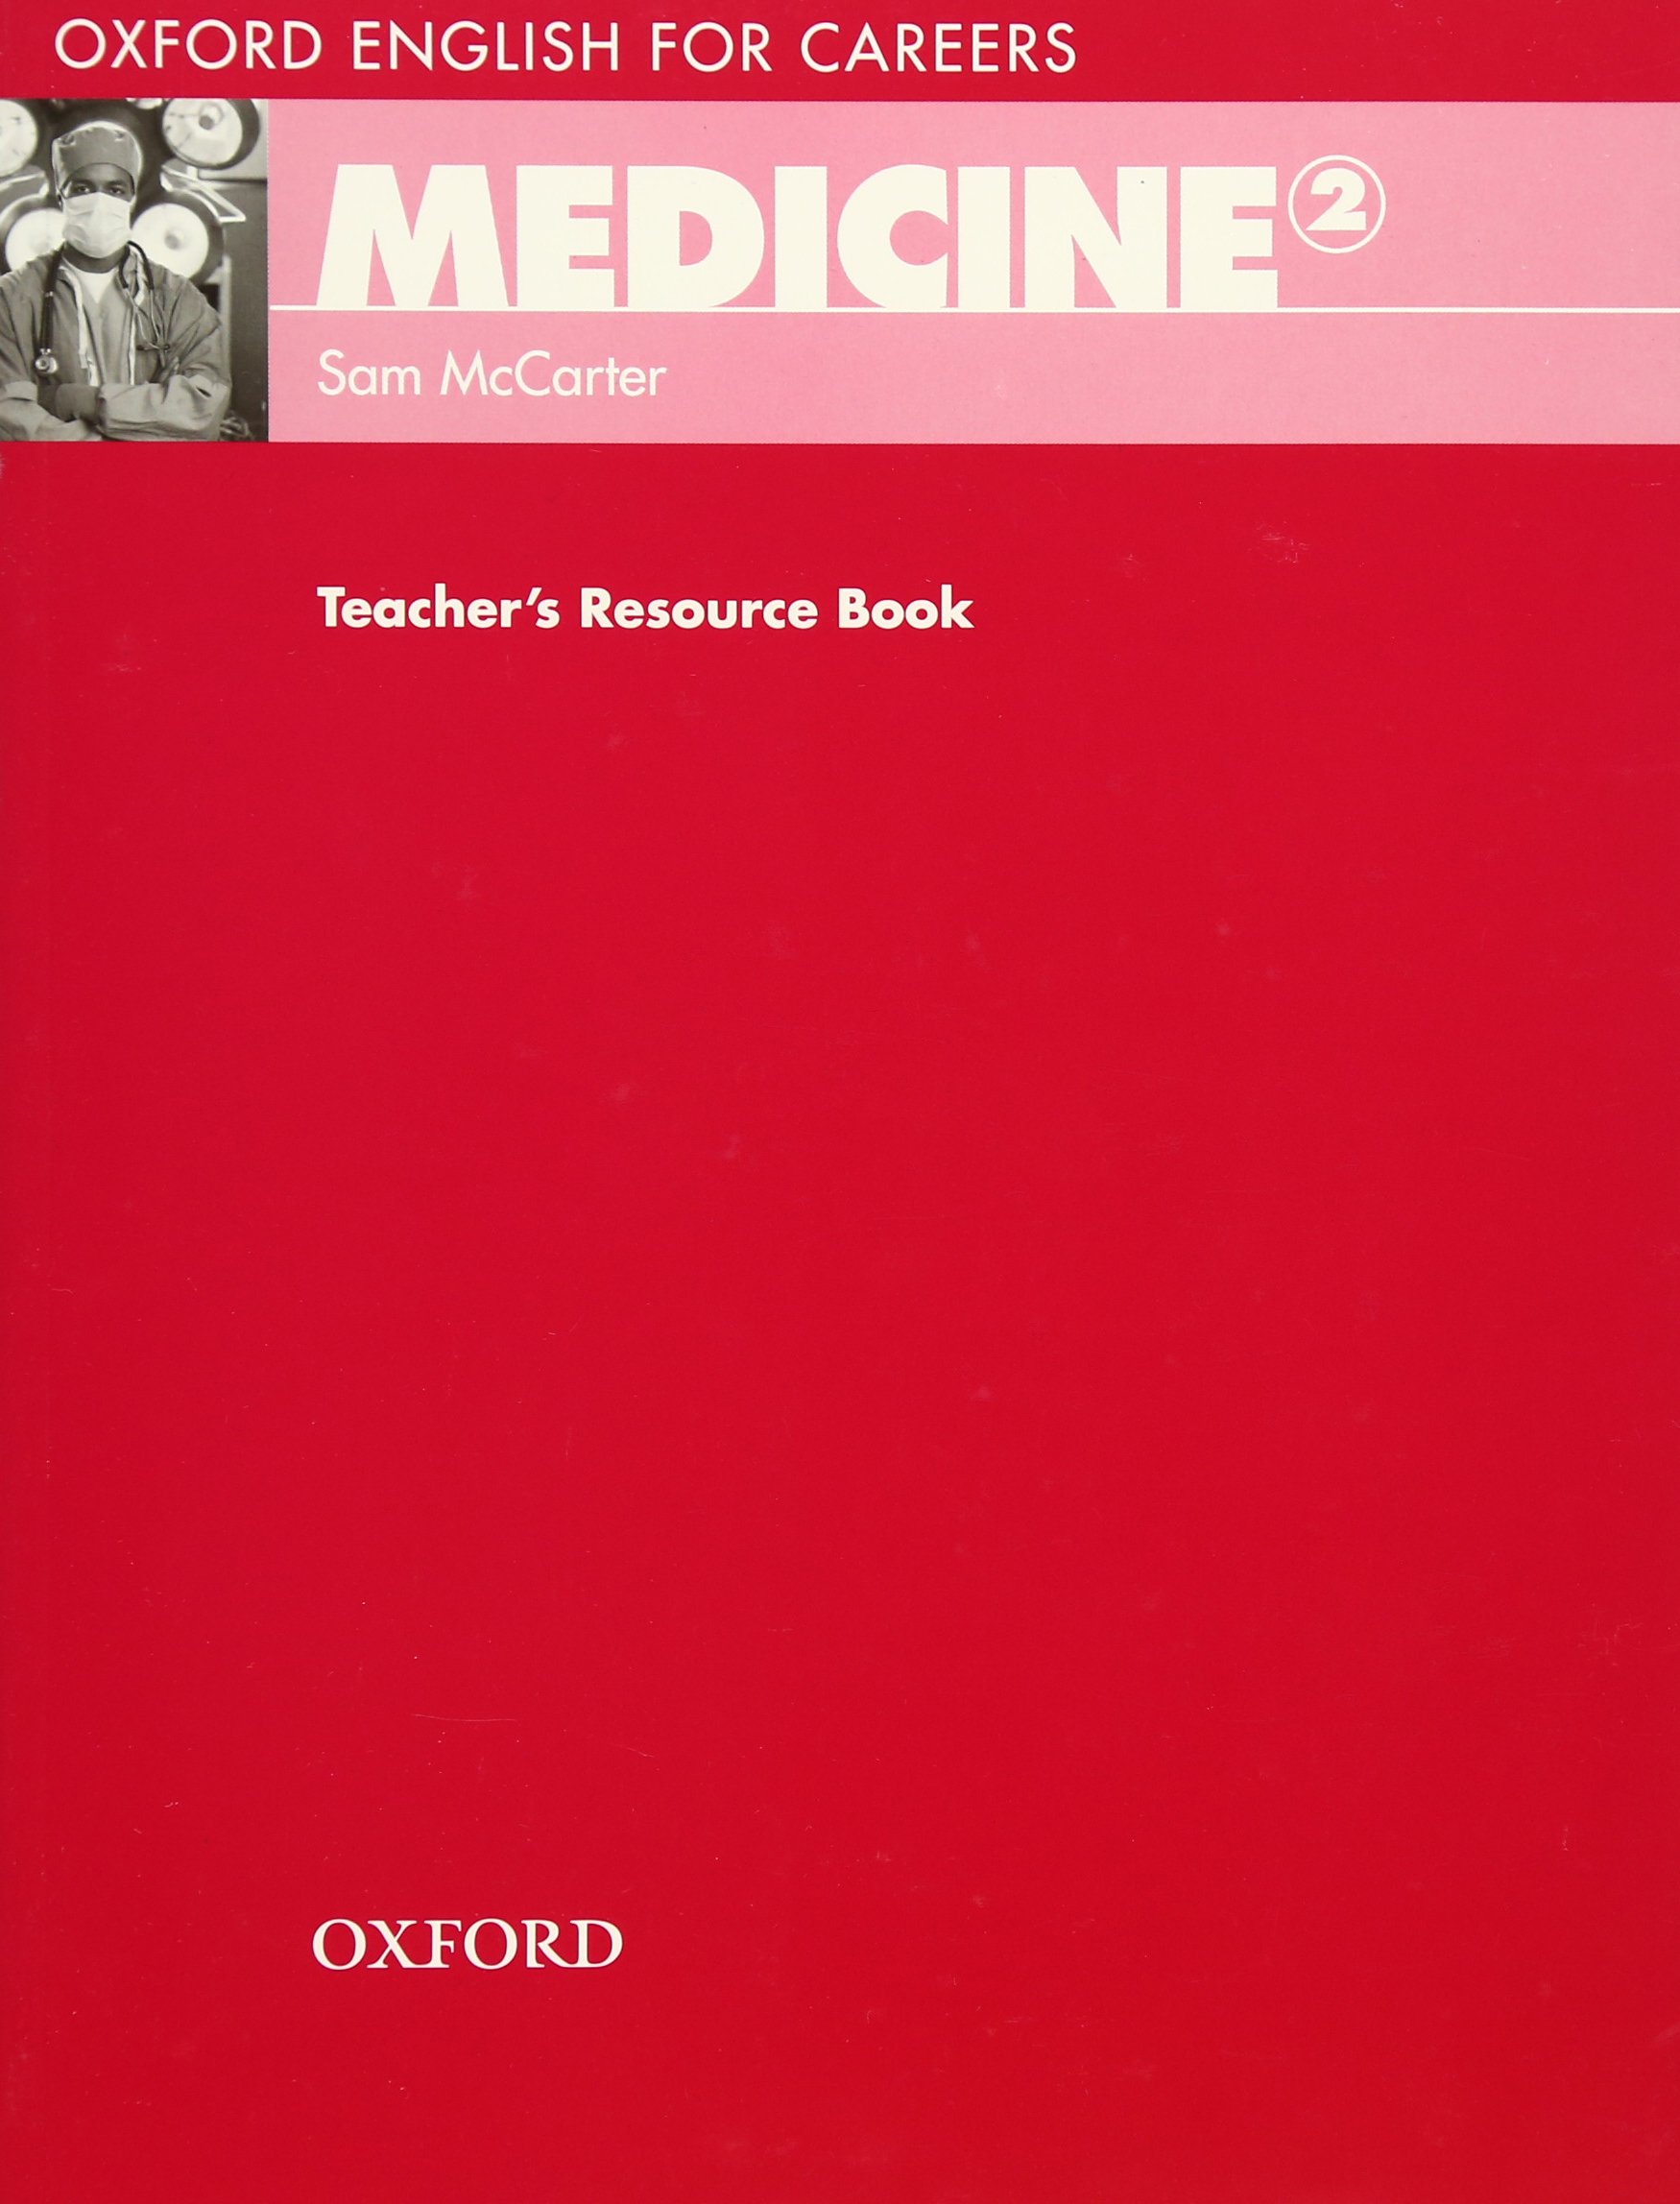 MEDICINE (OXFORD ENGLISH FOR CAREERS) 2 Teacher's Resource Book